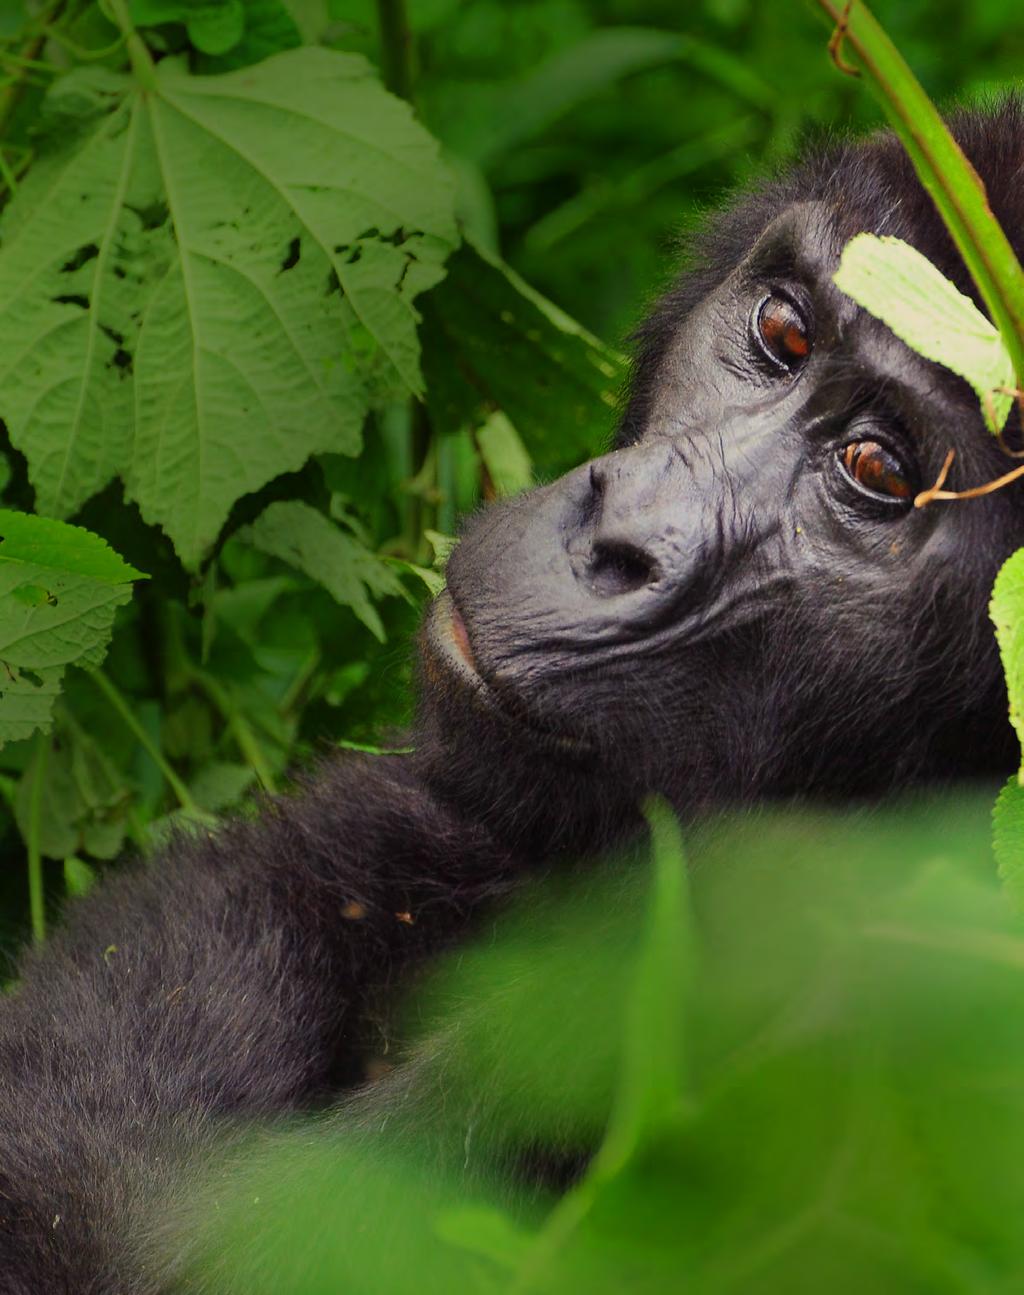 COMMUNITY AND CONSERVATION INITIATIVES GORILLA DOCTORS Critically endangered mountain gorillas are the only great apes whose wild populations are increasing, largely due to the work of Gorilla